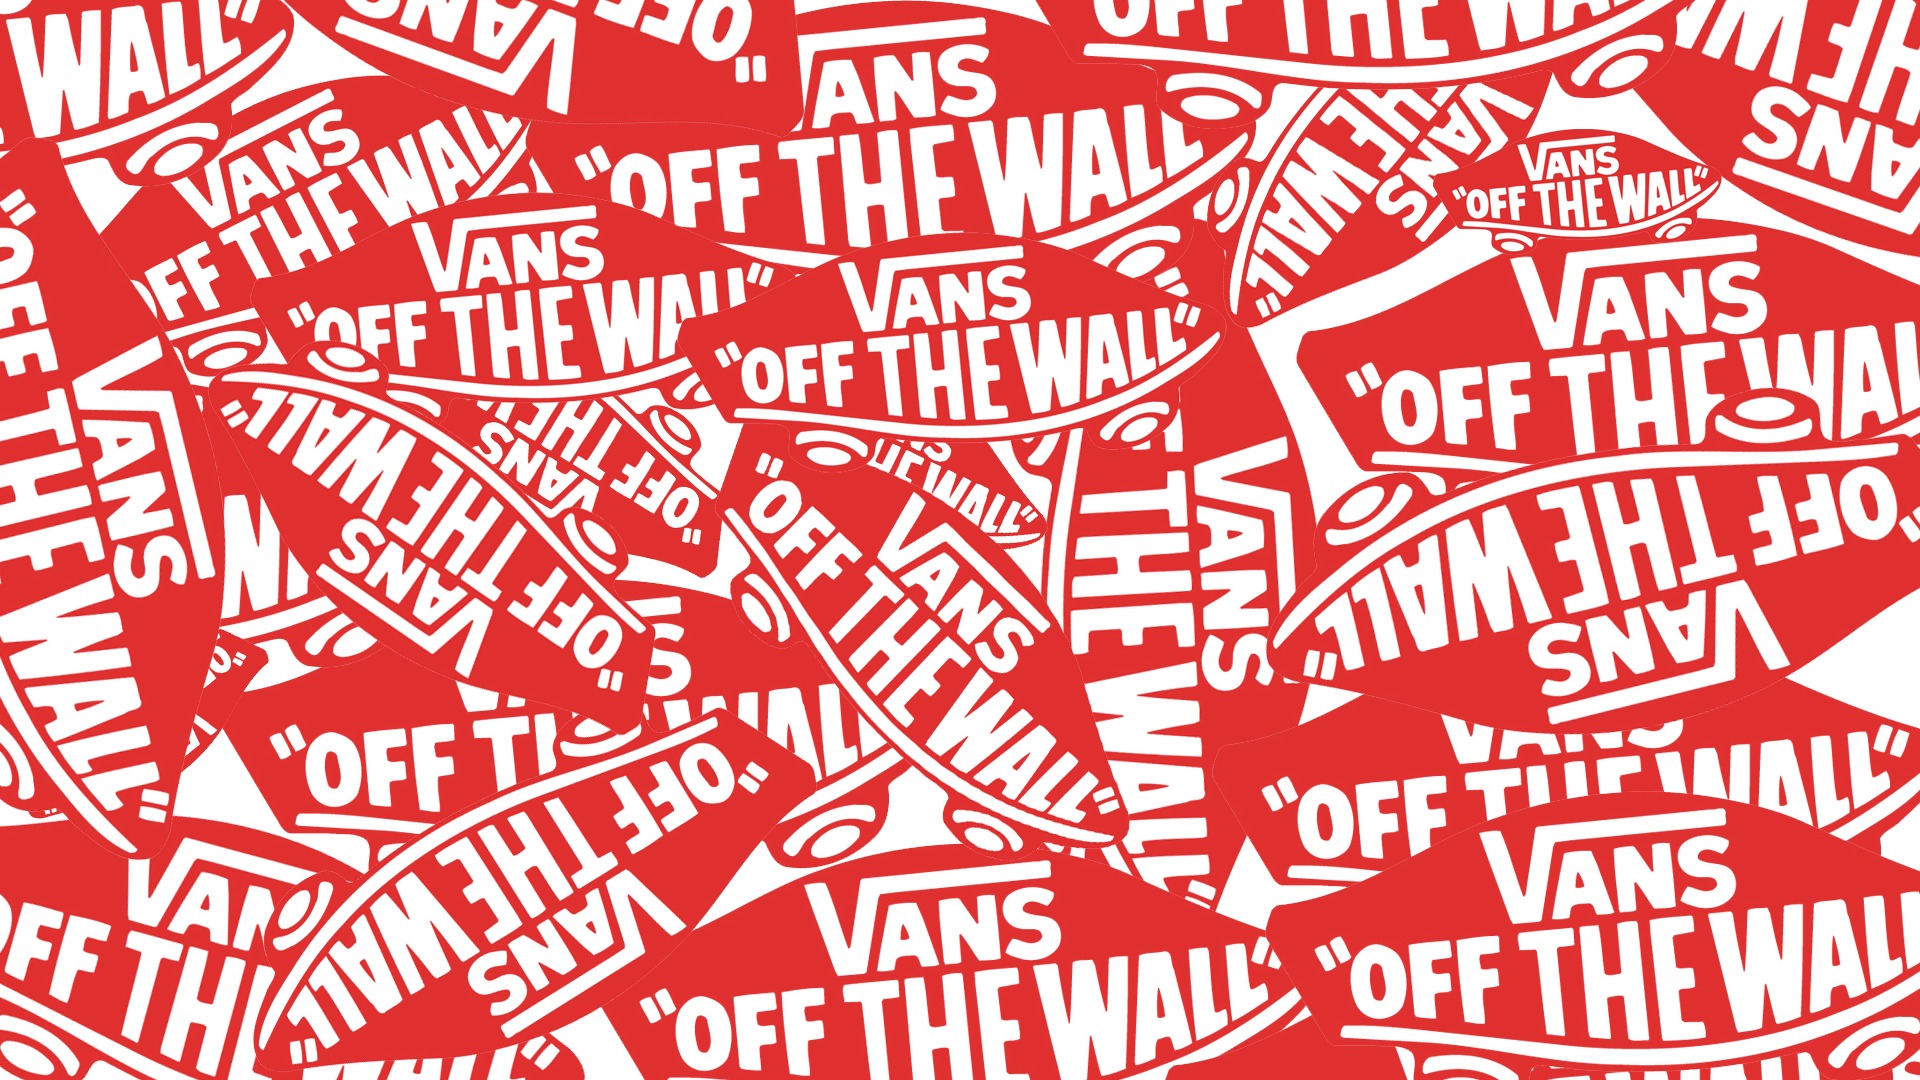 Learn about the history, origin and meaning of the Vans logo